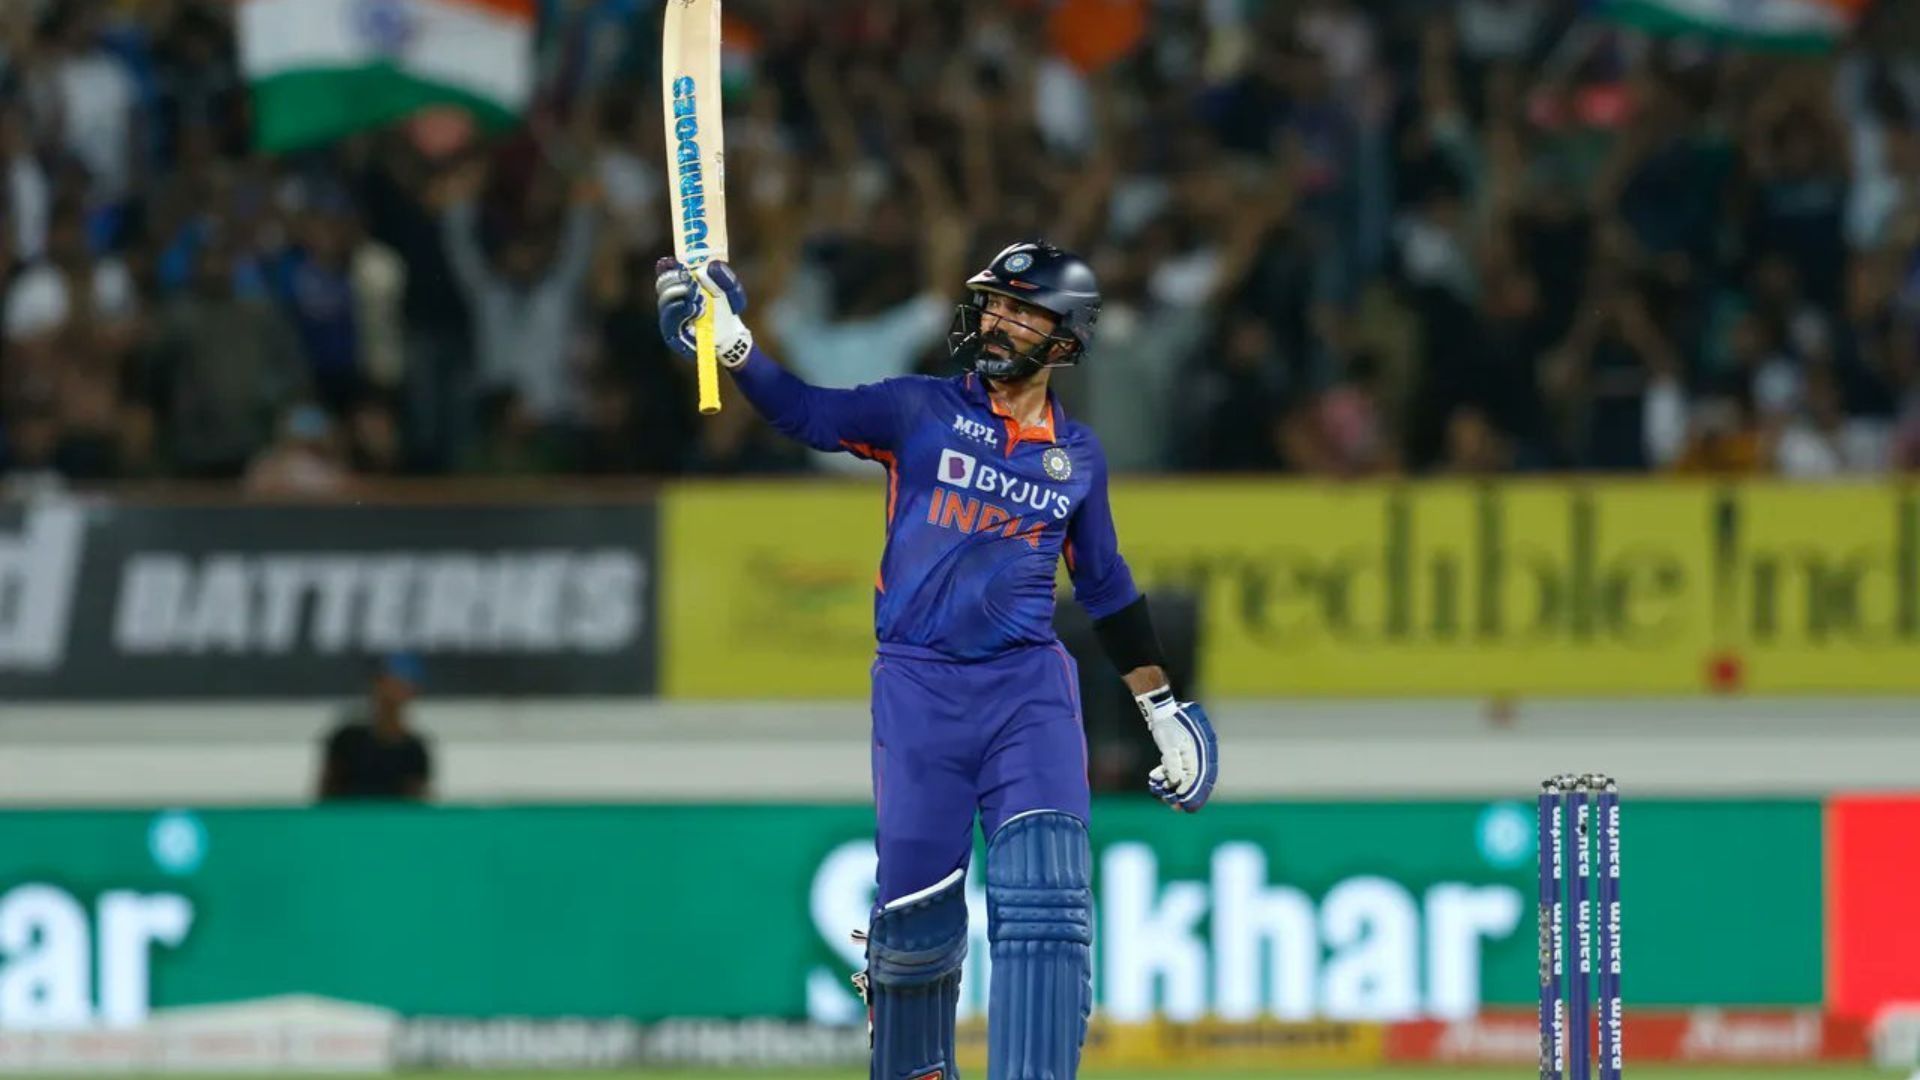 Dinesh Karthik soaks in the applause after scoring his maiden T20I fifty. (P.C.:BCCI)